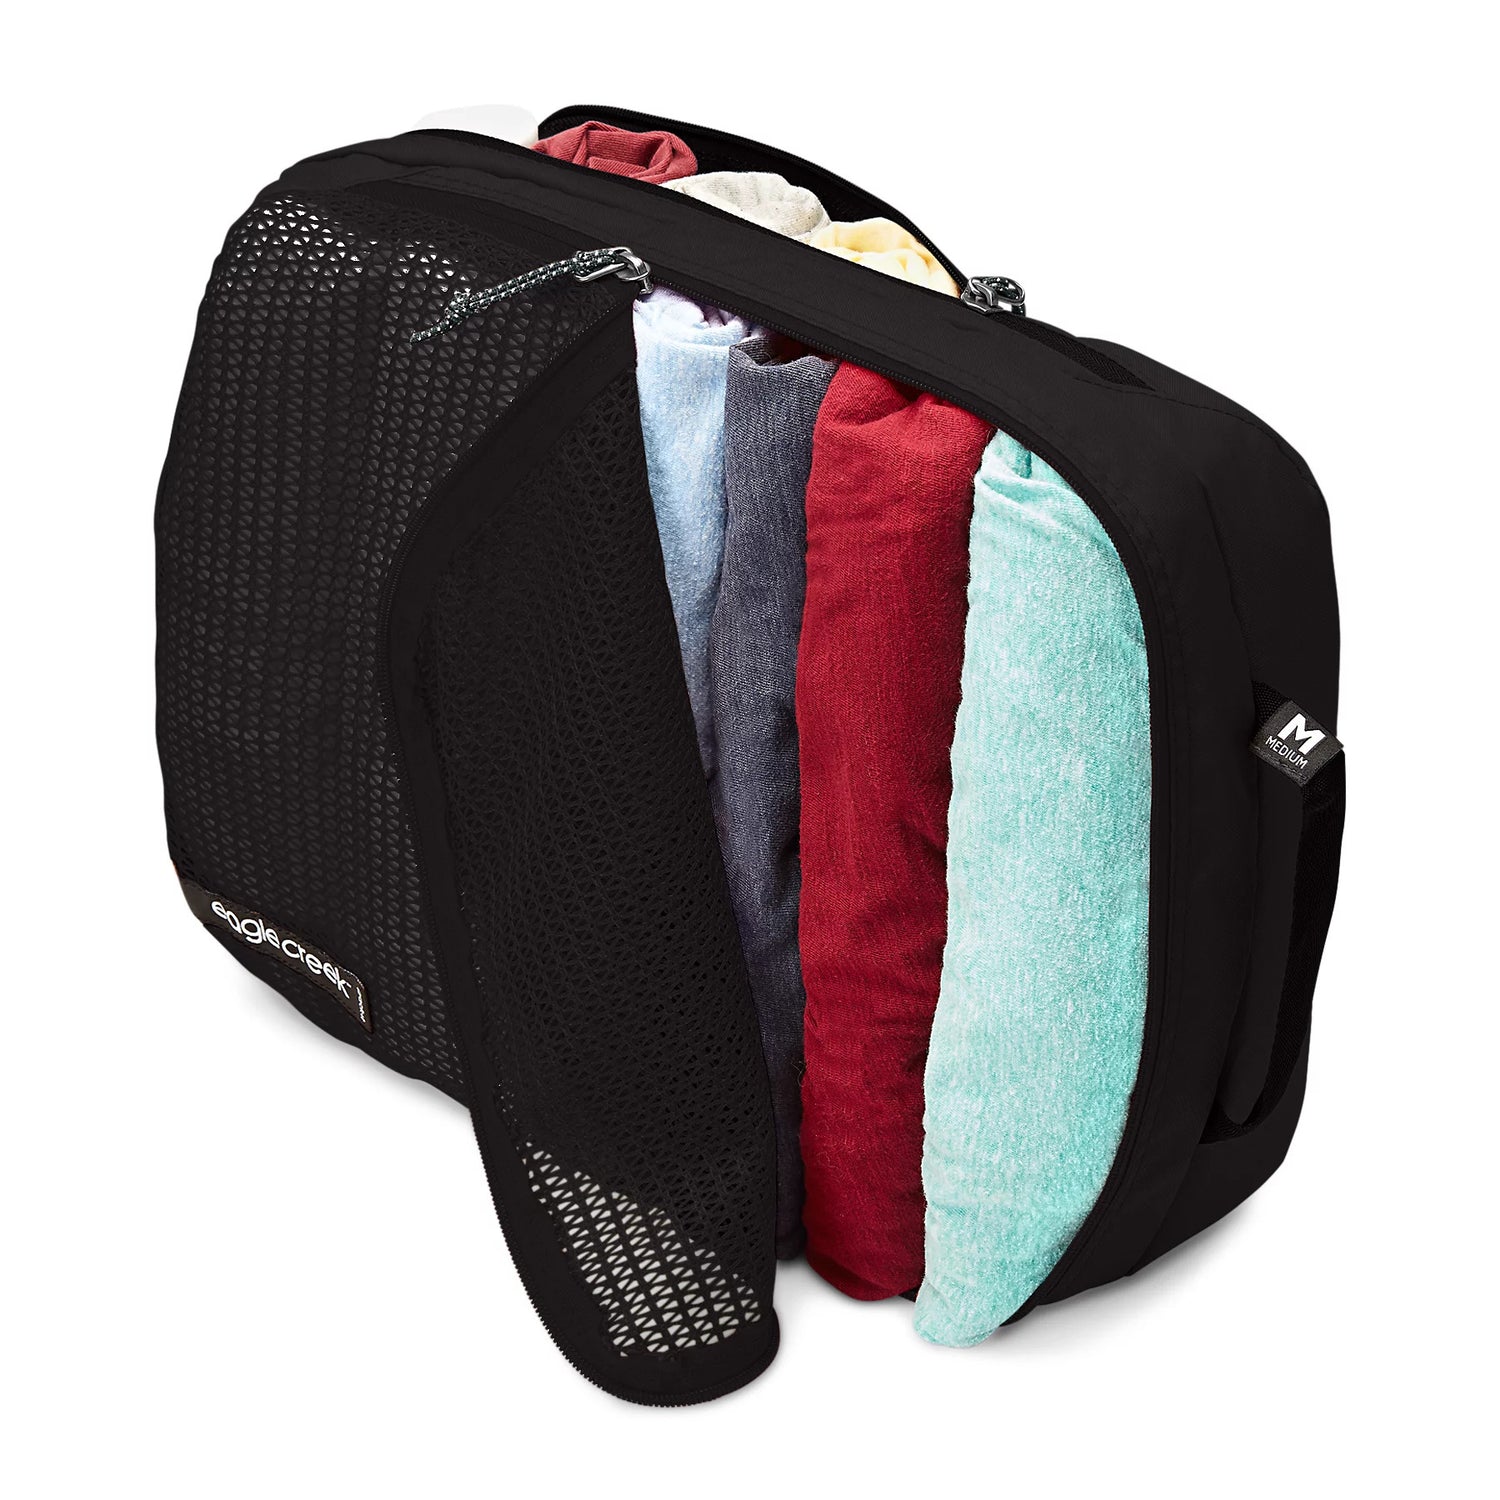 PACK-IT™ Reveal Clean/Dirty Cube M - BLACK